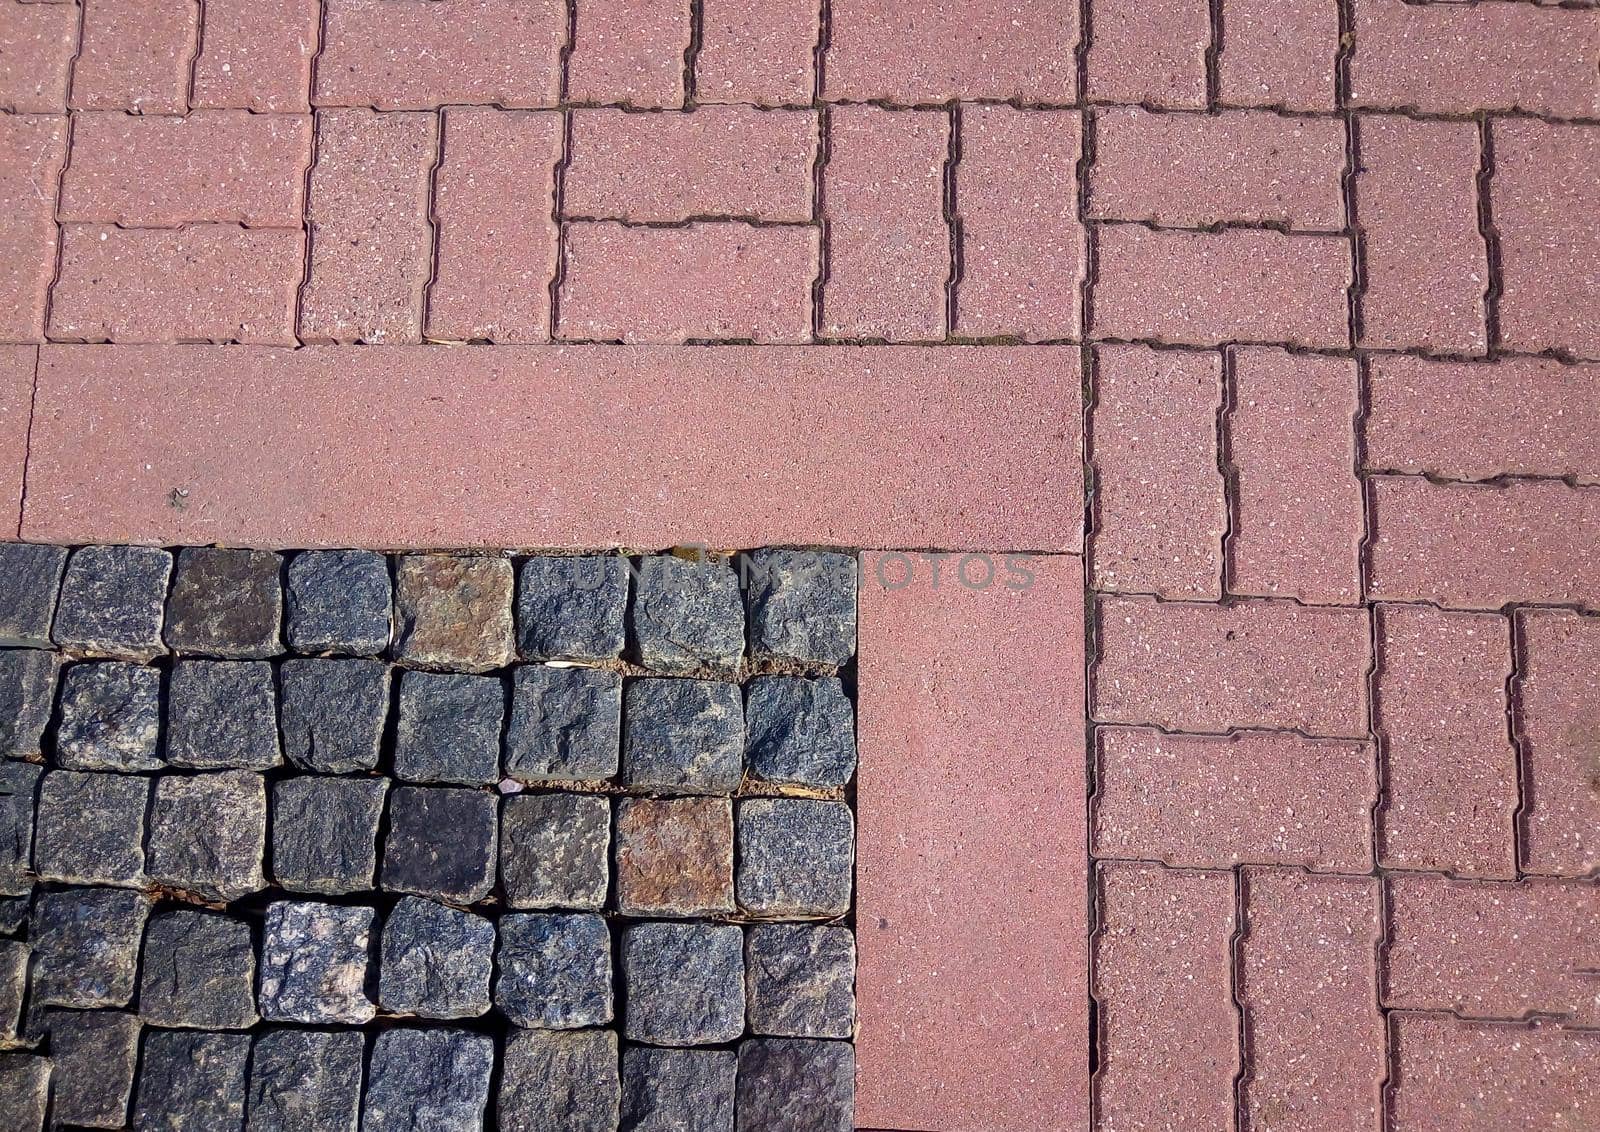 Rough pavement texture, old gray granite and red tiles.